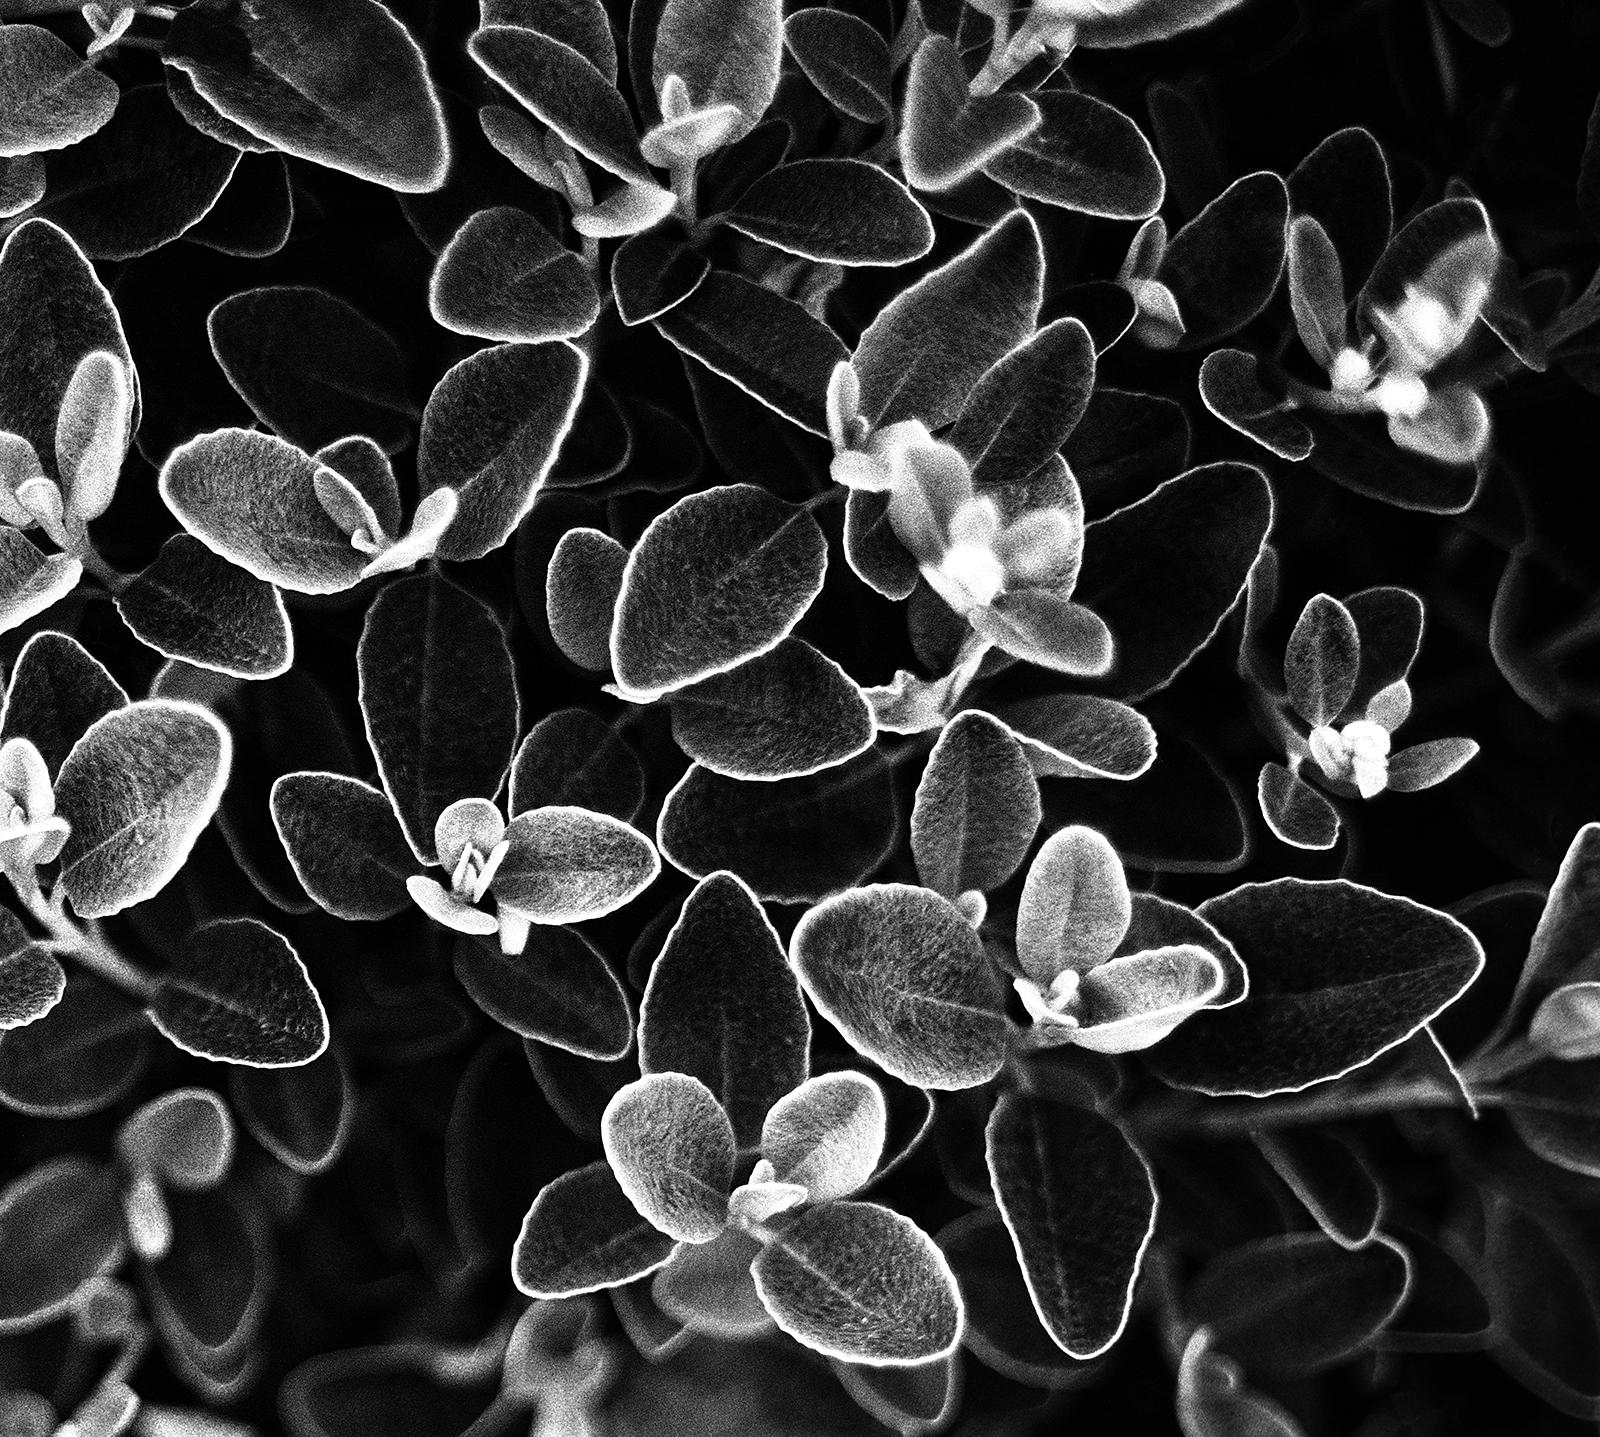 Flower- Signed limited edition art print, Black white nature photo, Contemporary - Photograph by Ian Sanderson